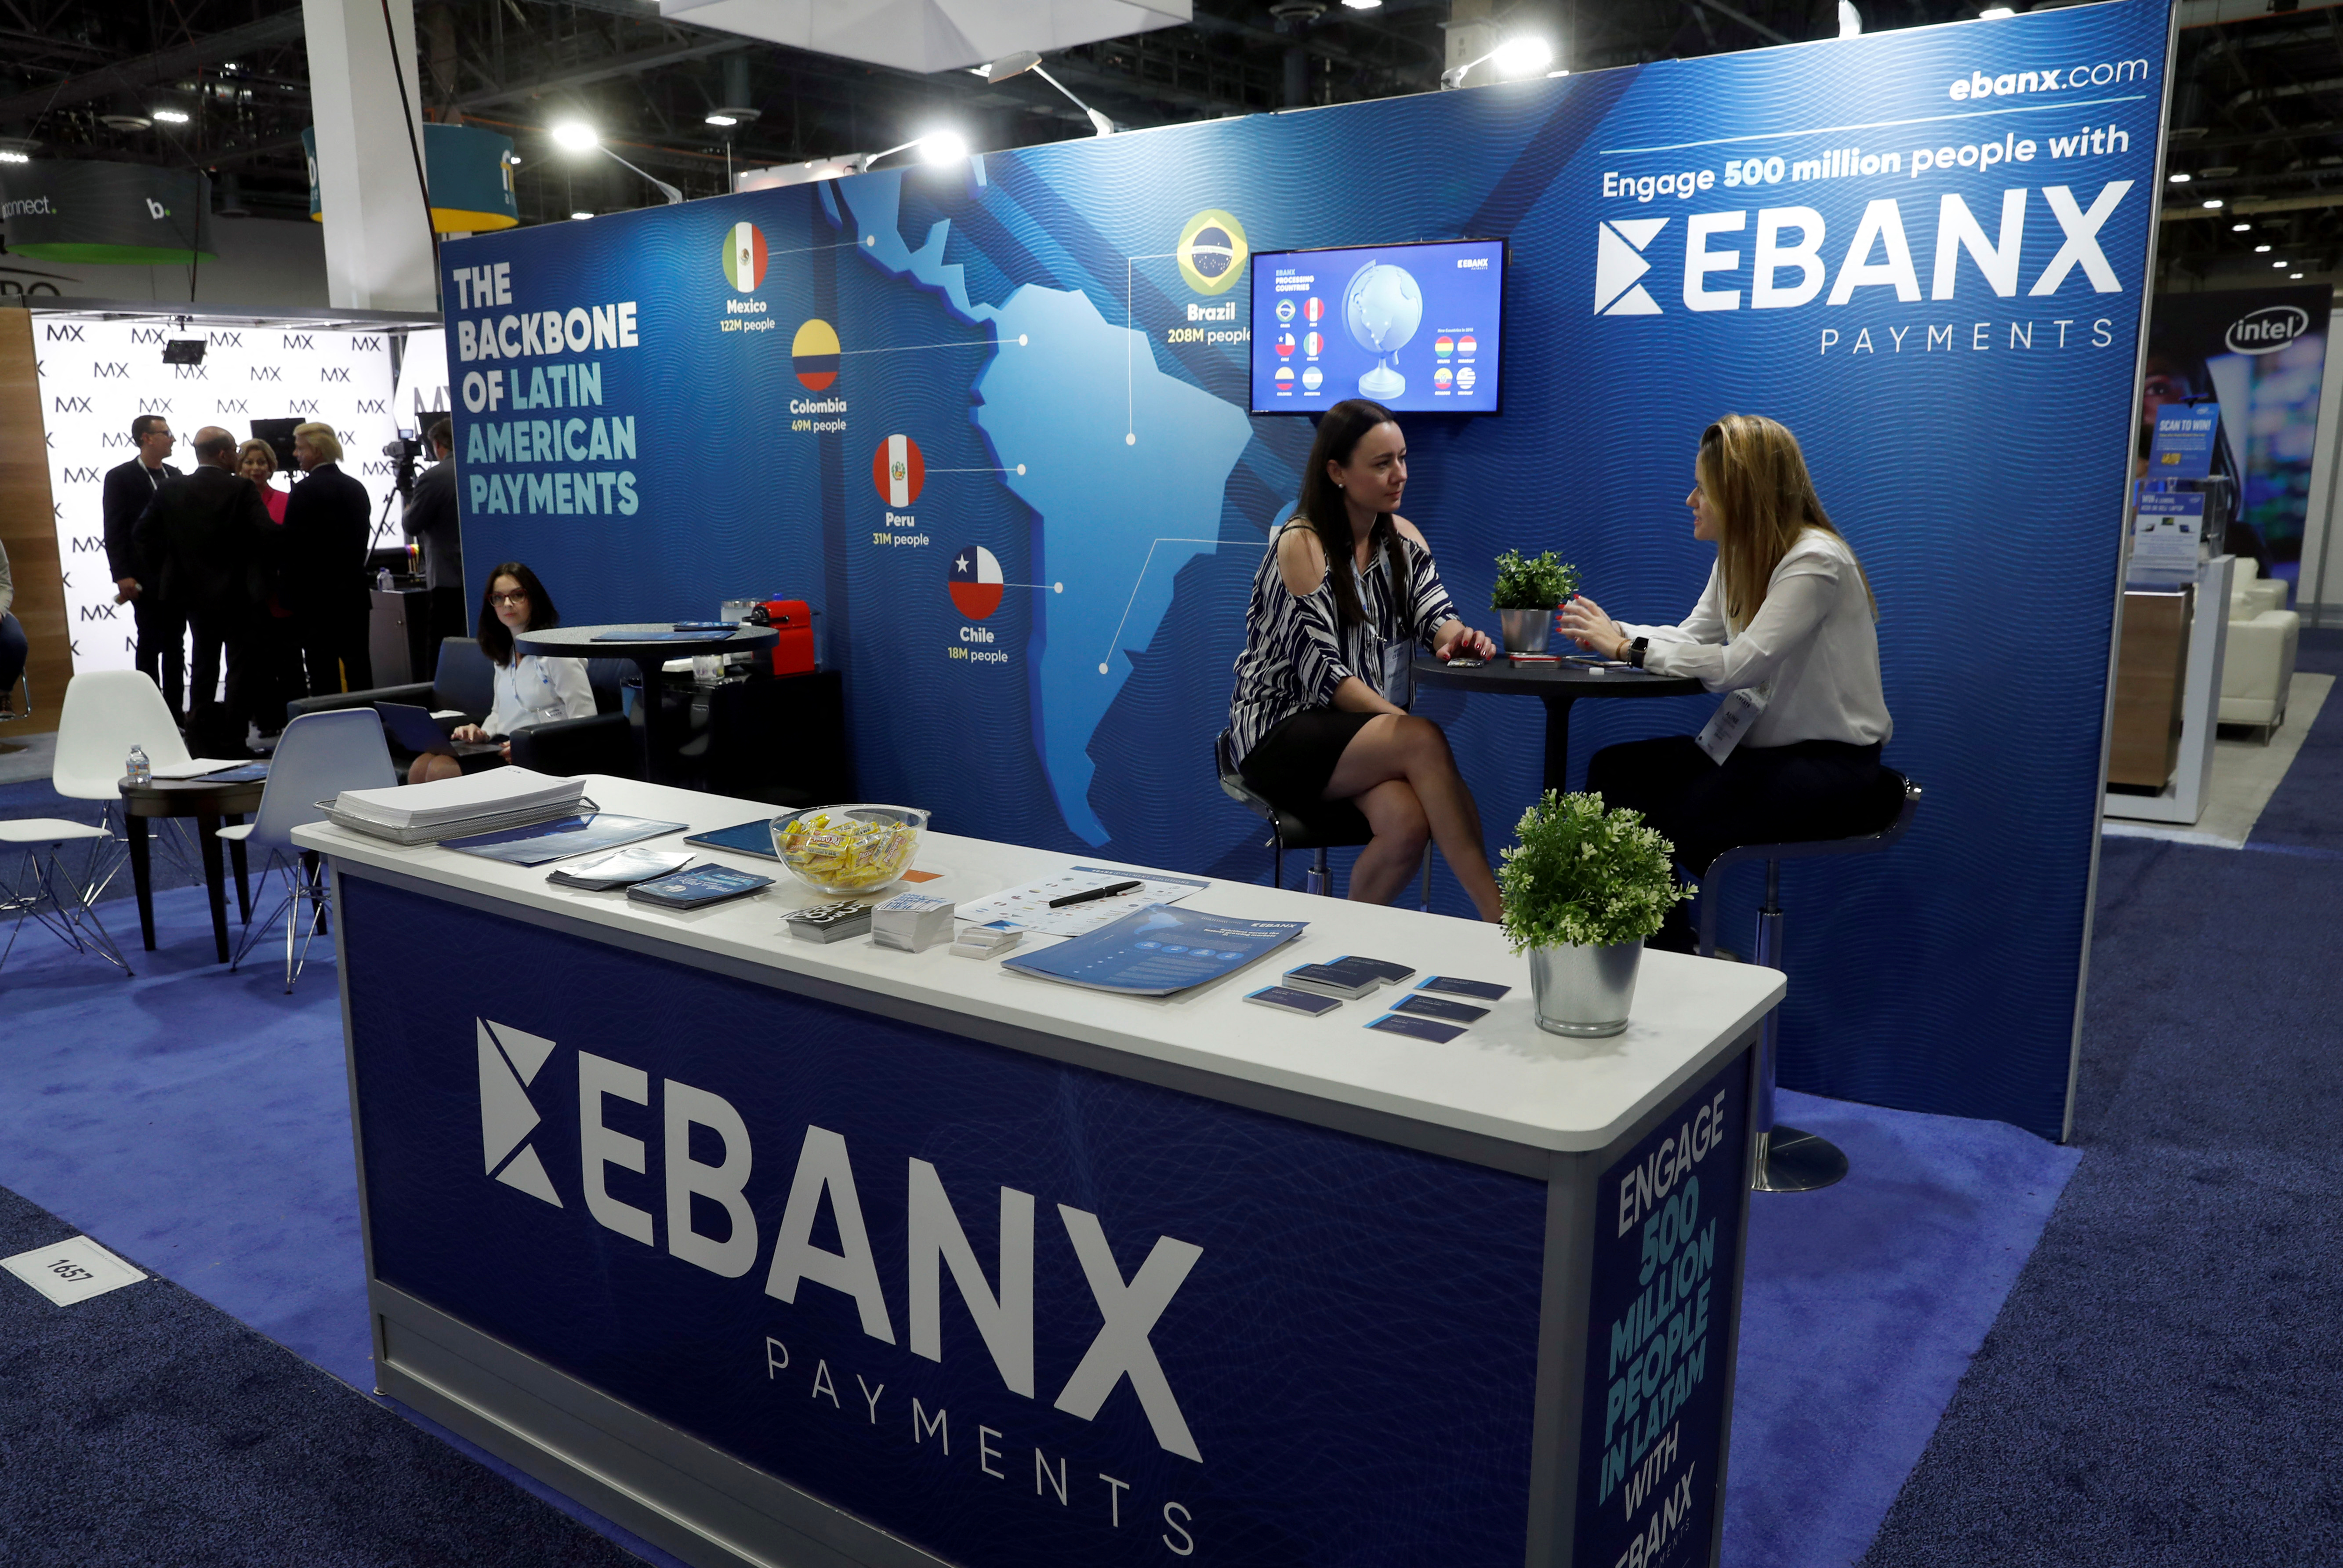 EBANX, a South and Central American payment processor, displays on the exhibit hall floor during the Money 20/20 conference in Las Vegas, Nevada, U.S. on October 24, 2017. REUTERS/Steve Marcus